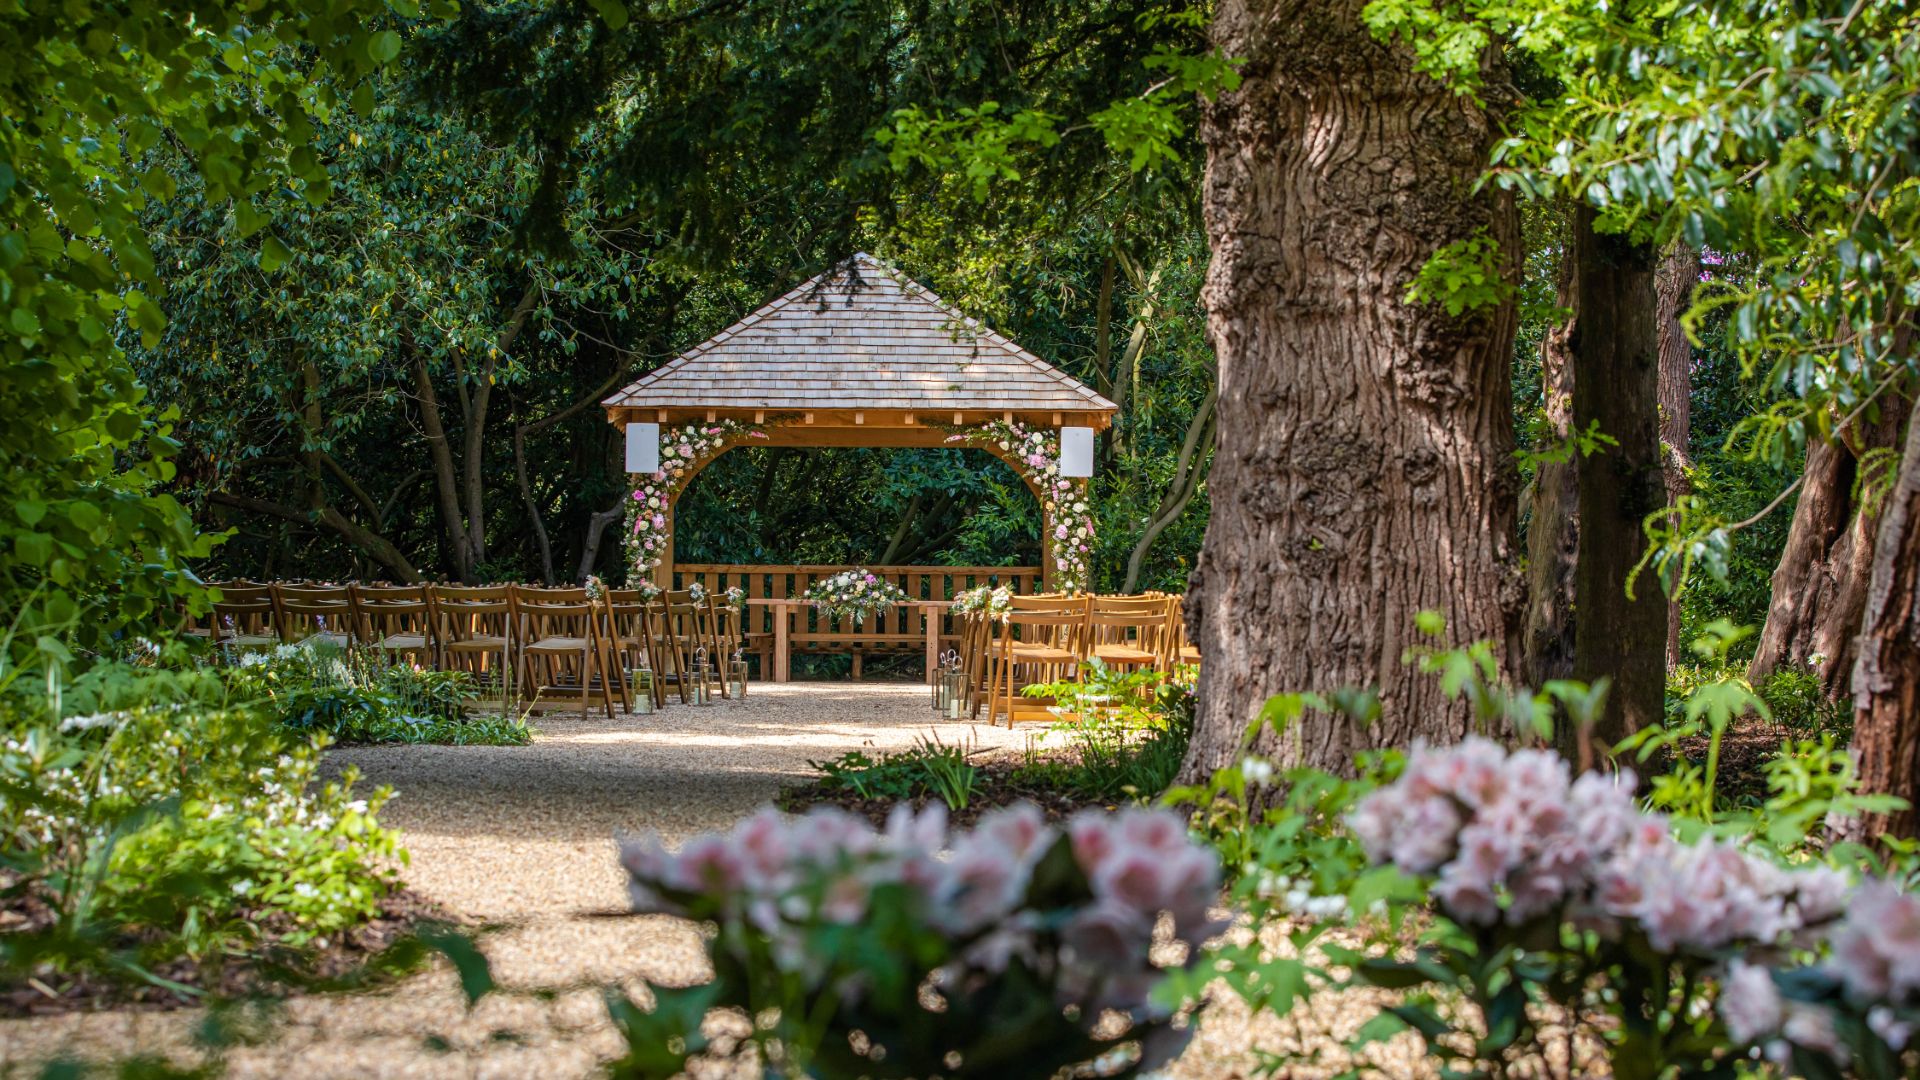 A view of the Outdoor Ceremony Garden taken amongst woodland and flowers